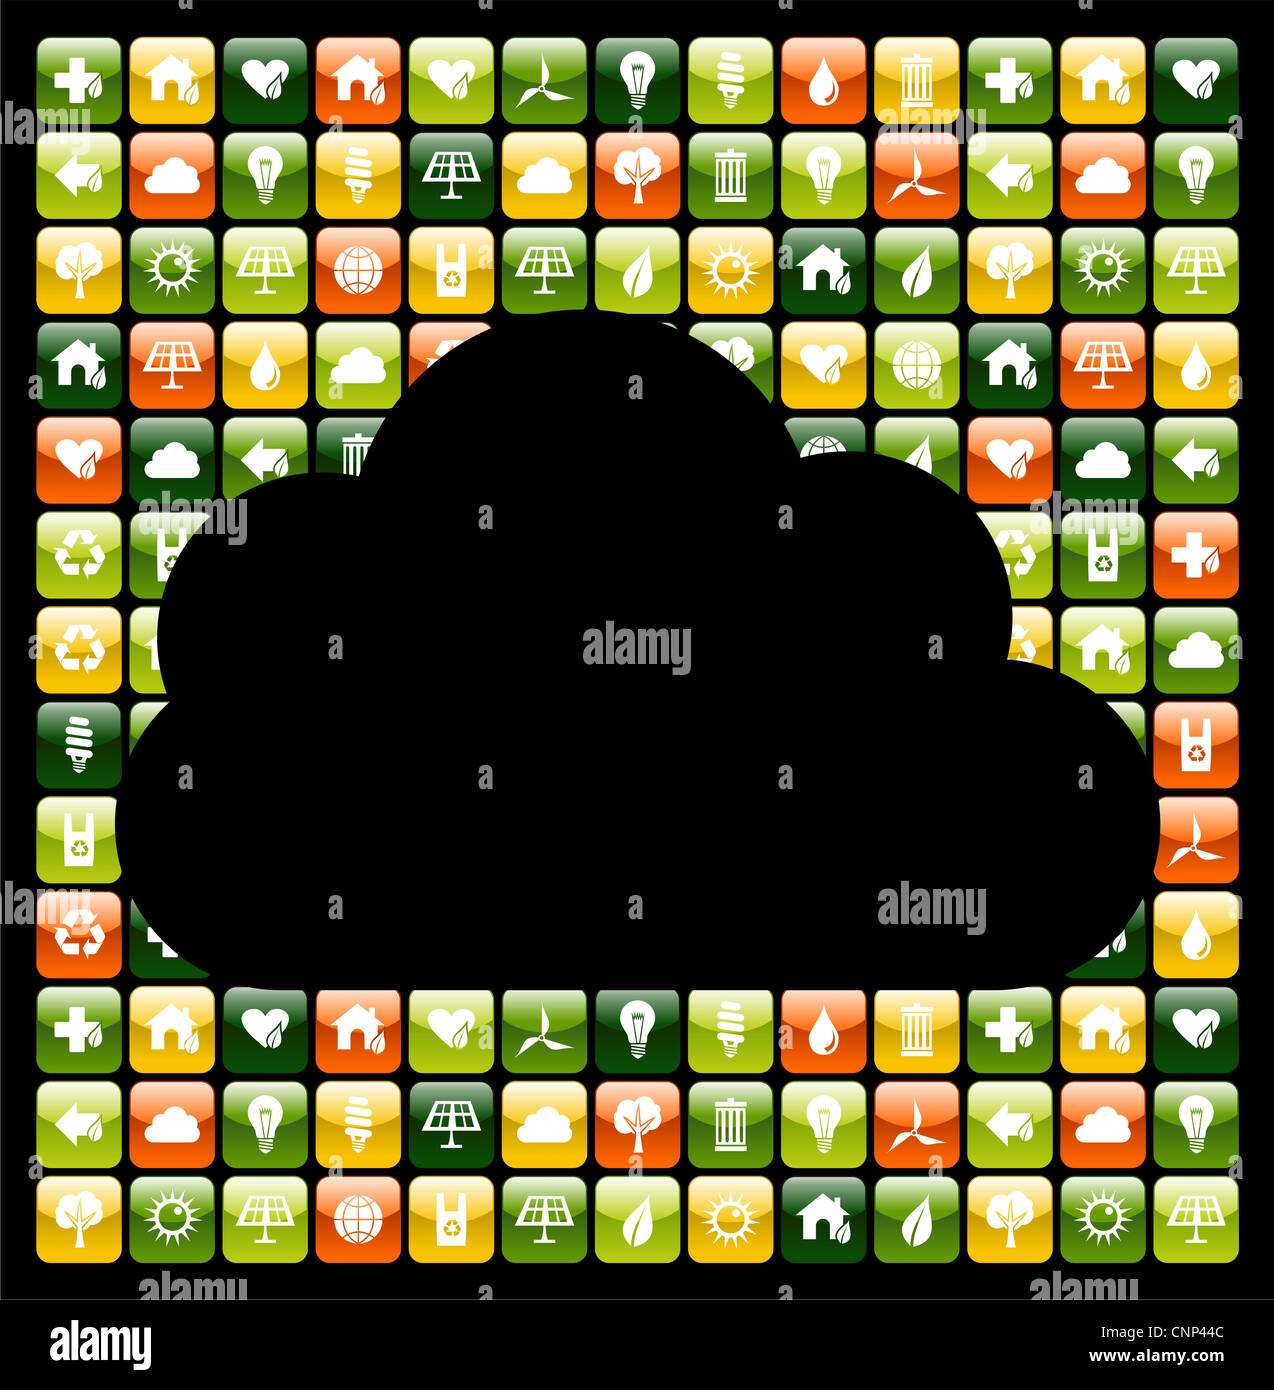 Cloud computing over iphone green app icons background. Vector file available. Stock Photo